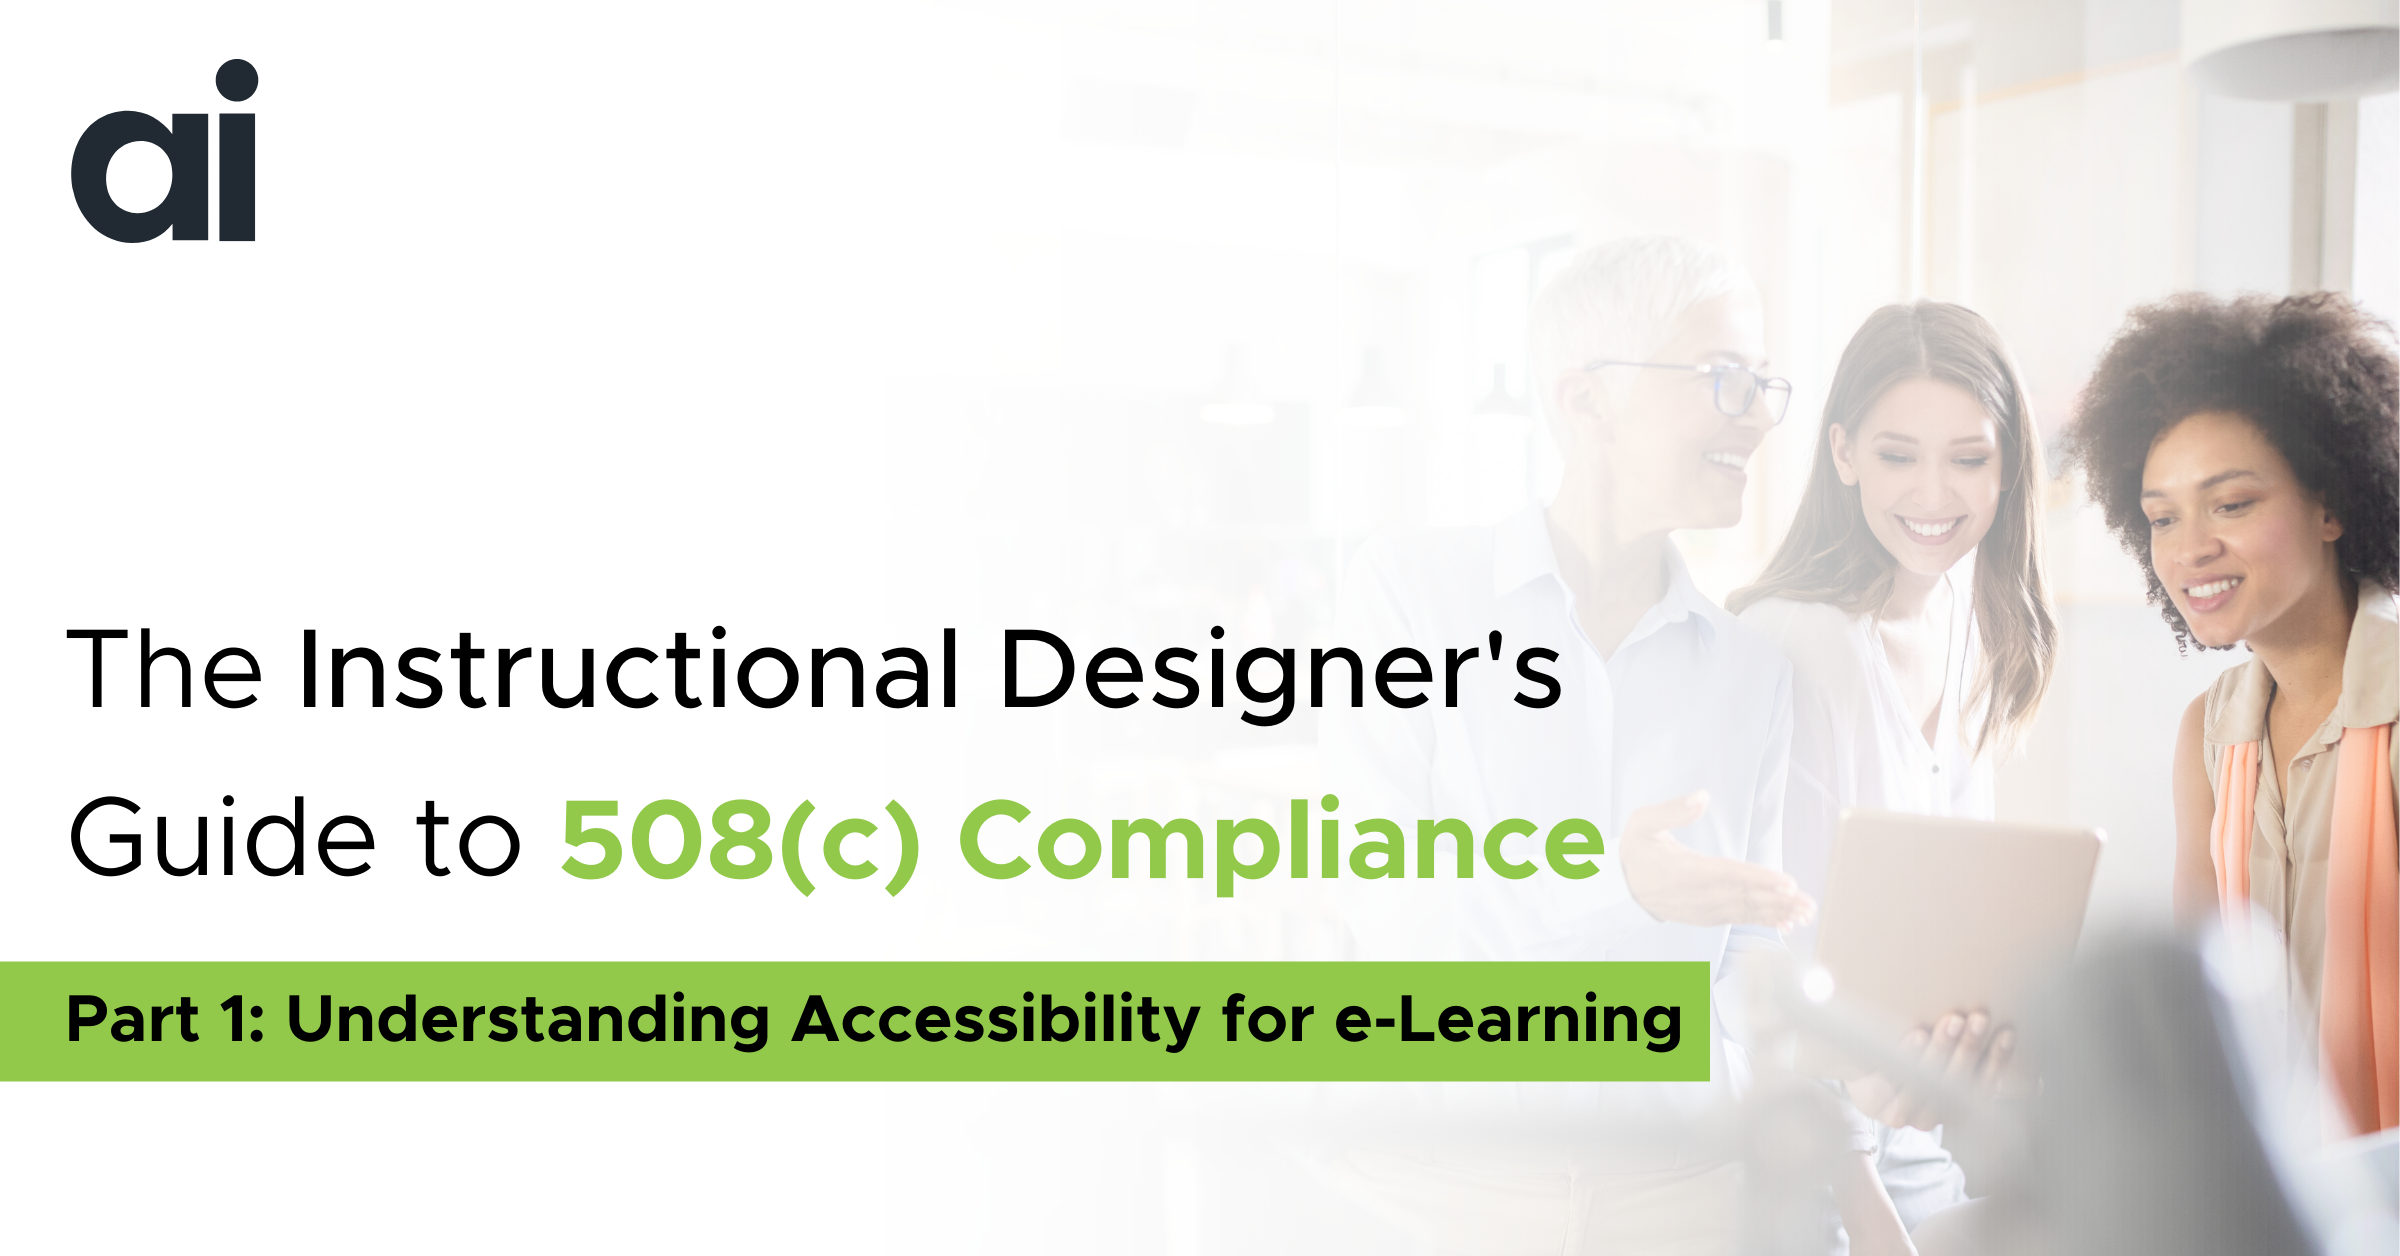 508(c) Compliance Guide for Instructional Designers - Part 1: Understanding Accessibility for e-Learning